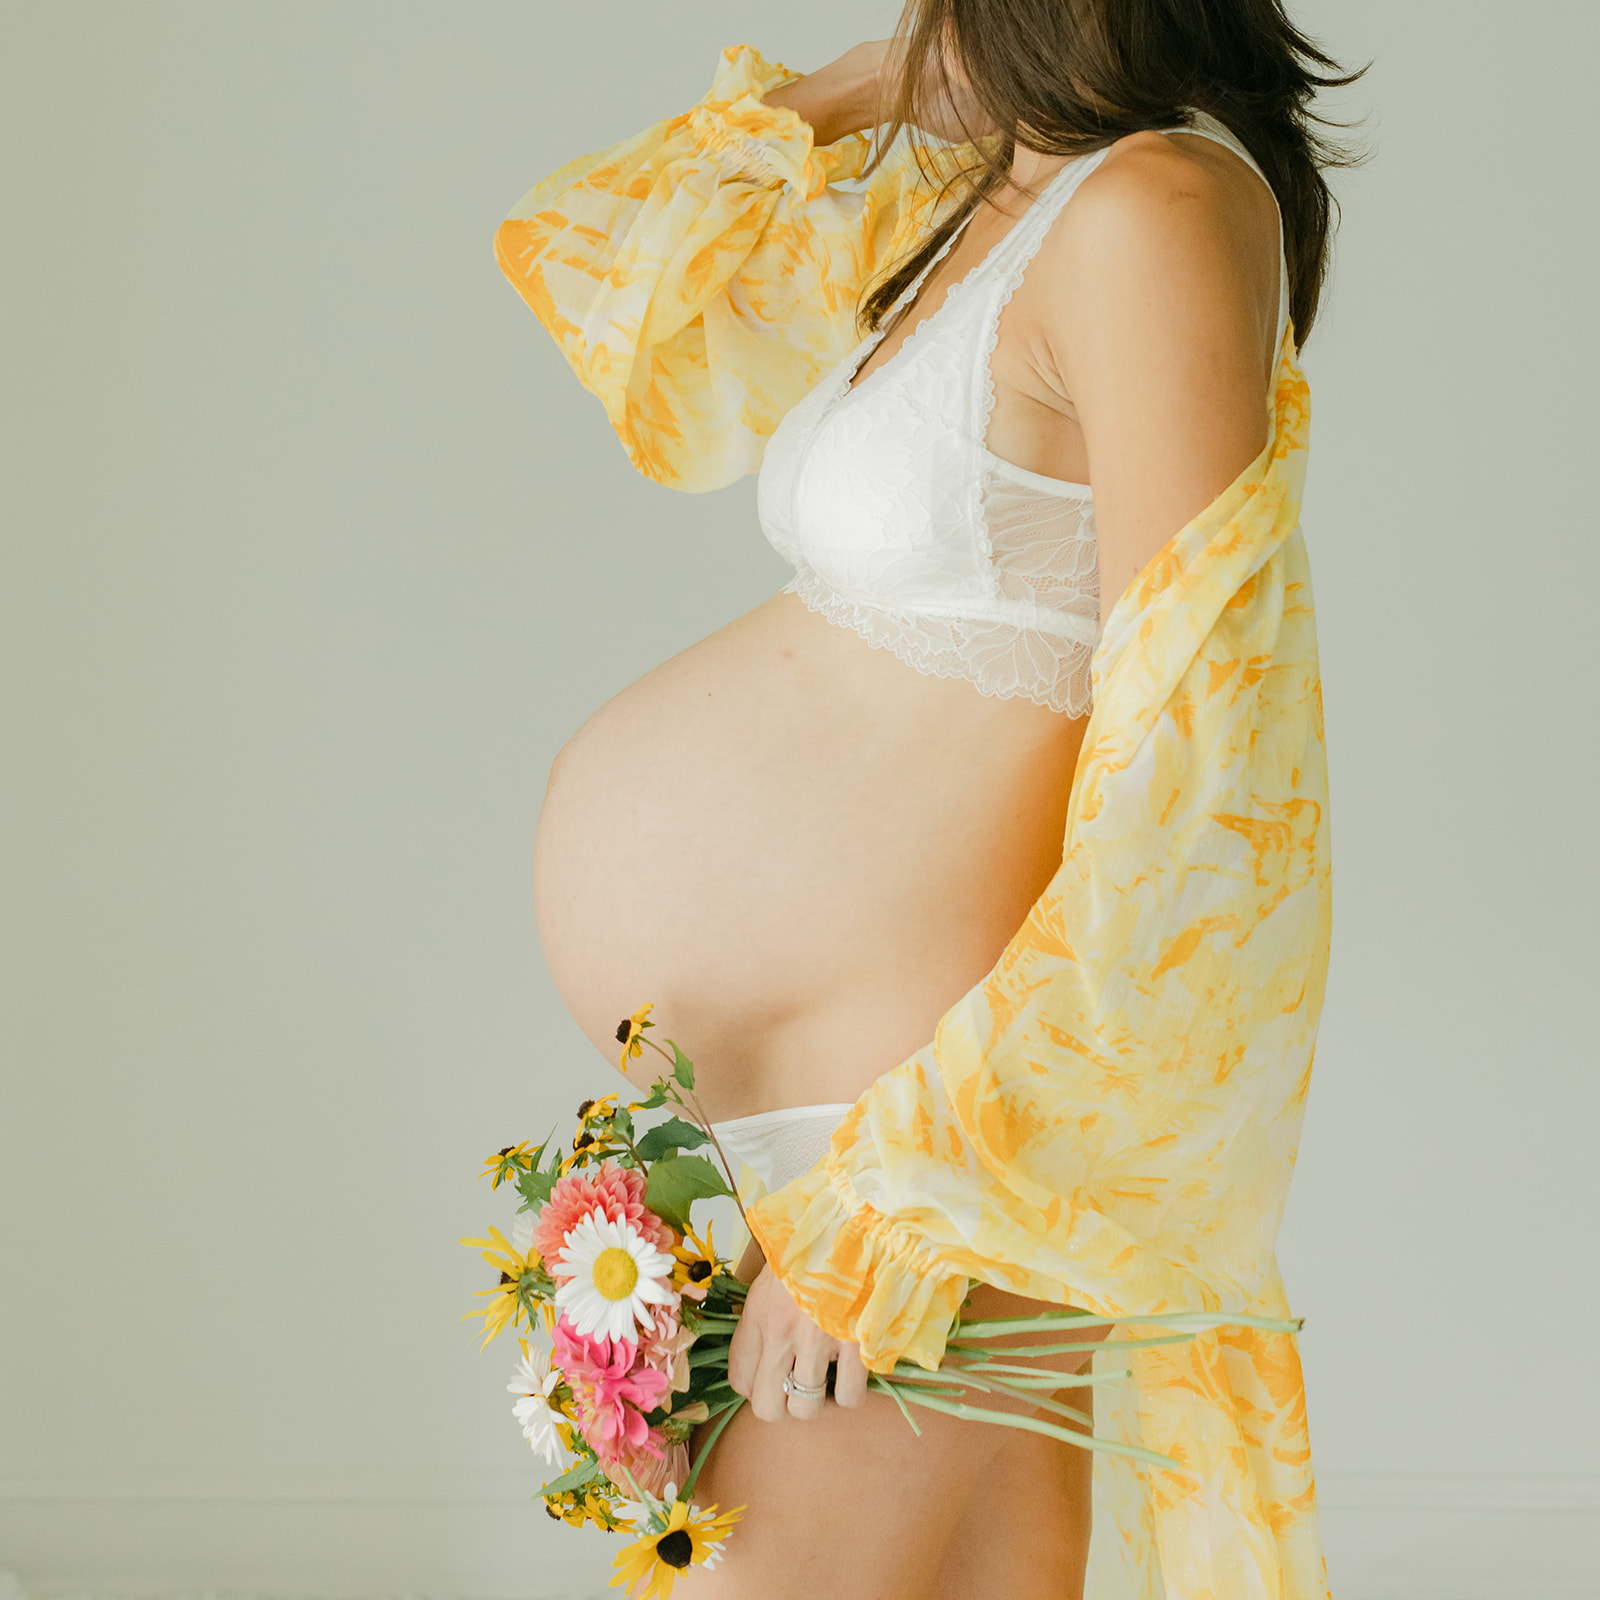 body empowerment and maternity session in nashville studio